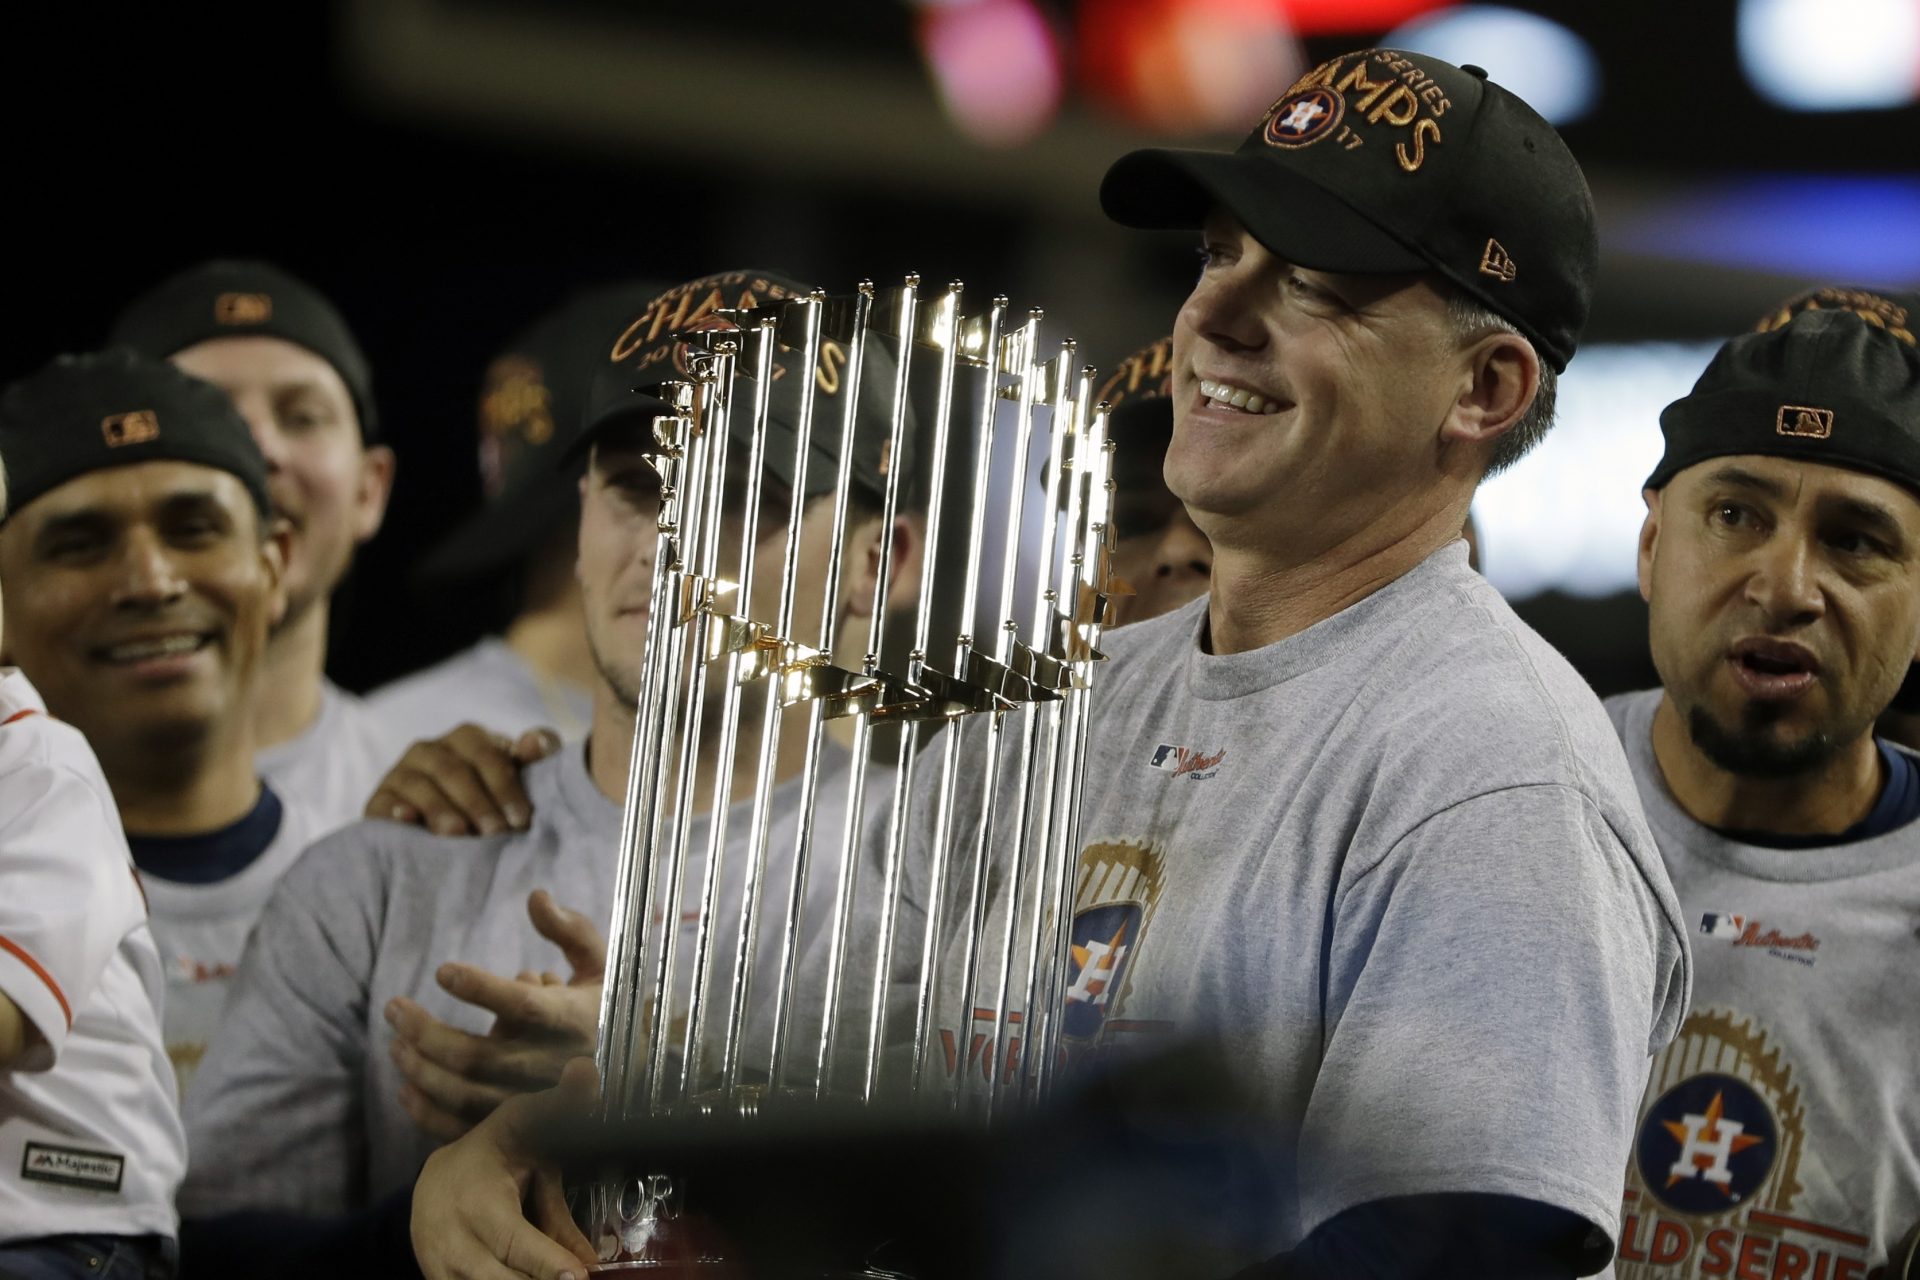 FILE - In this Nov. 1, 2017, file photo, Houston Astros manager A.J. Hinch holds the championship trophy after Game 7 of baseball's World Series against the Los Angeles Dodgers, in Los Angeles. Houston manager AJ Hinch and general manager Jeff Luhnow were suspended for the entire season Monday, Jan. 13, 2020, and the team was fined $5 million for sign-stealing by the team in 2017 and 2018 season. Commissioner Rob Manfred announced the discipline and strongly hinted that current Boston manager Alex Cora — the Astros bench coach in 2017 — will face punishment later. Manfred said Cora developed the sign-stealing system used by the Astros.